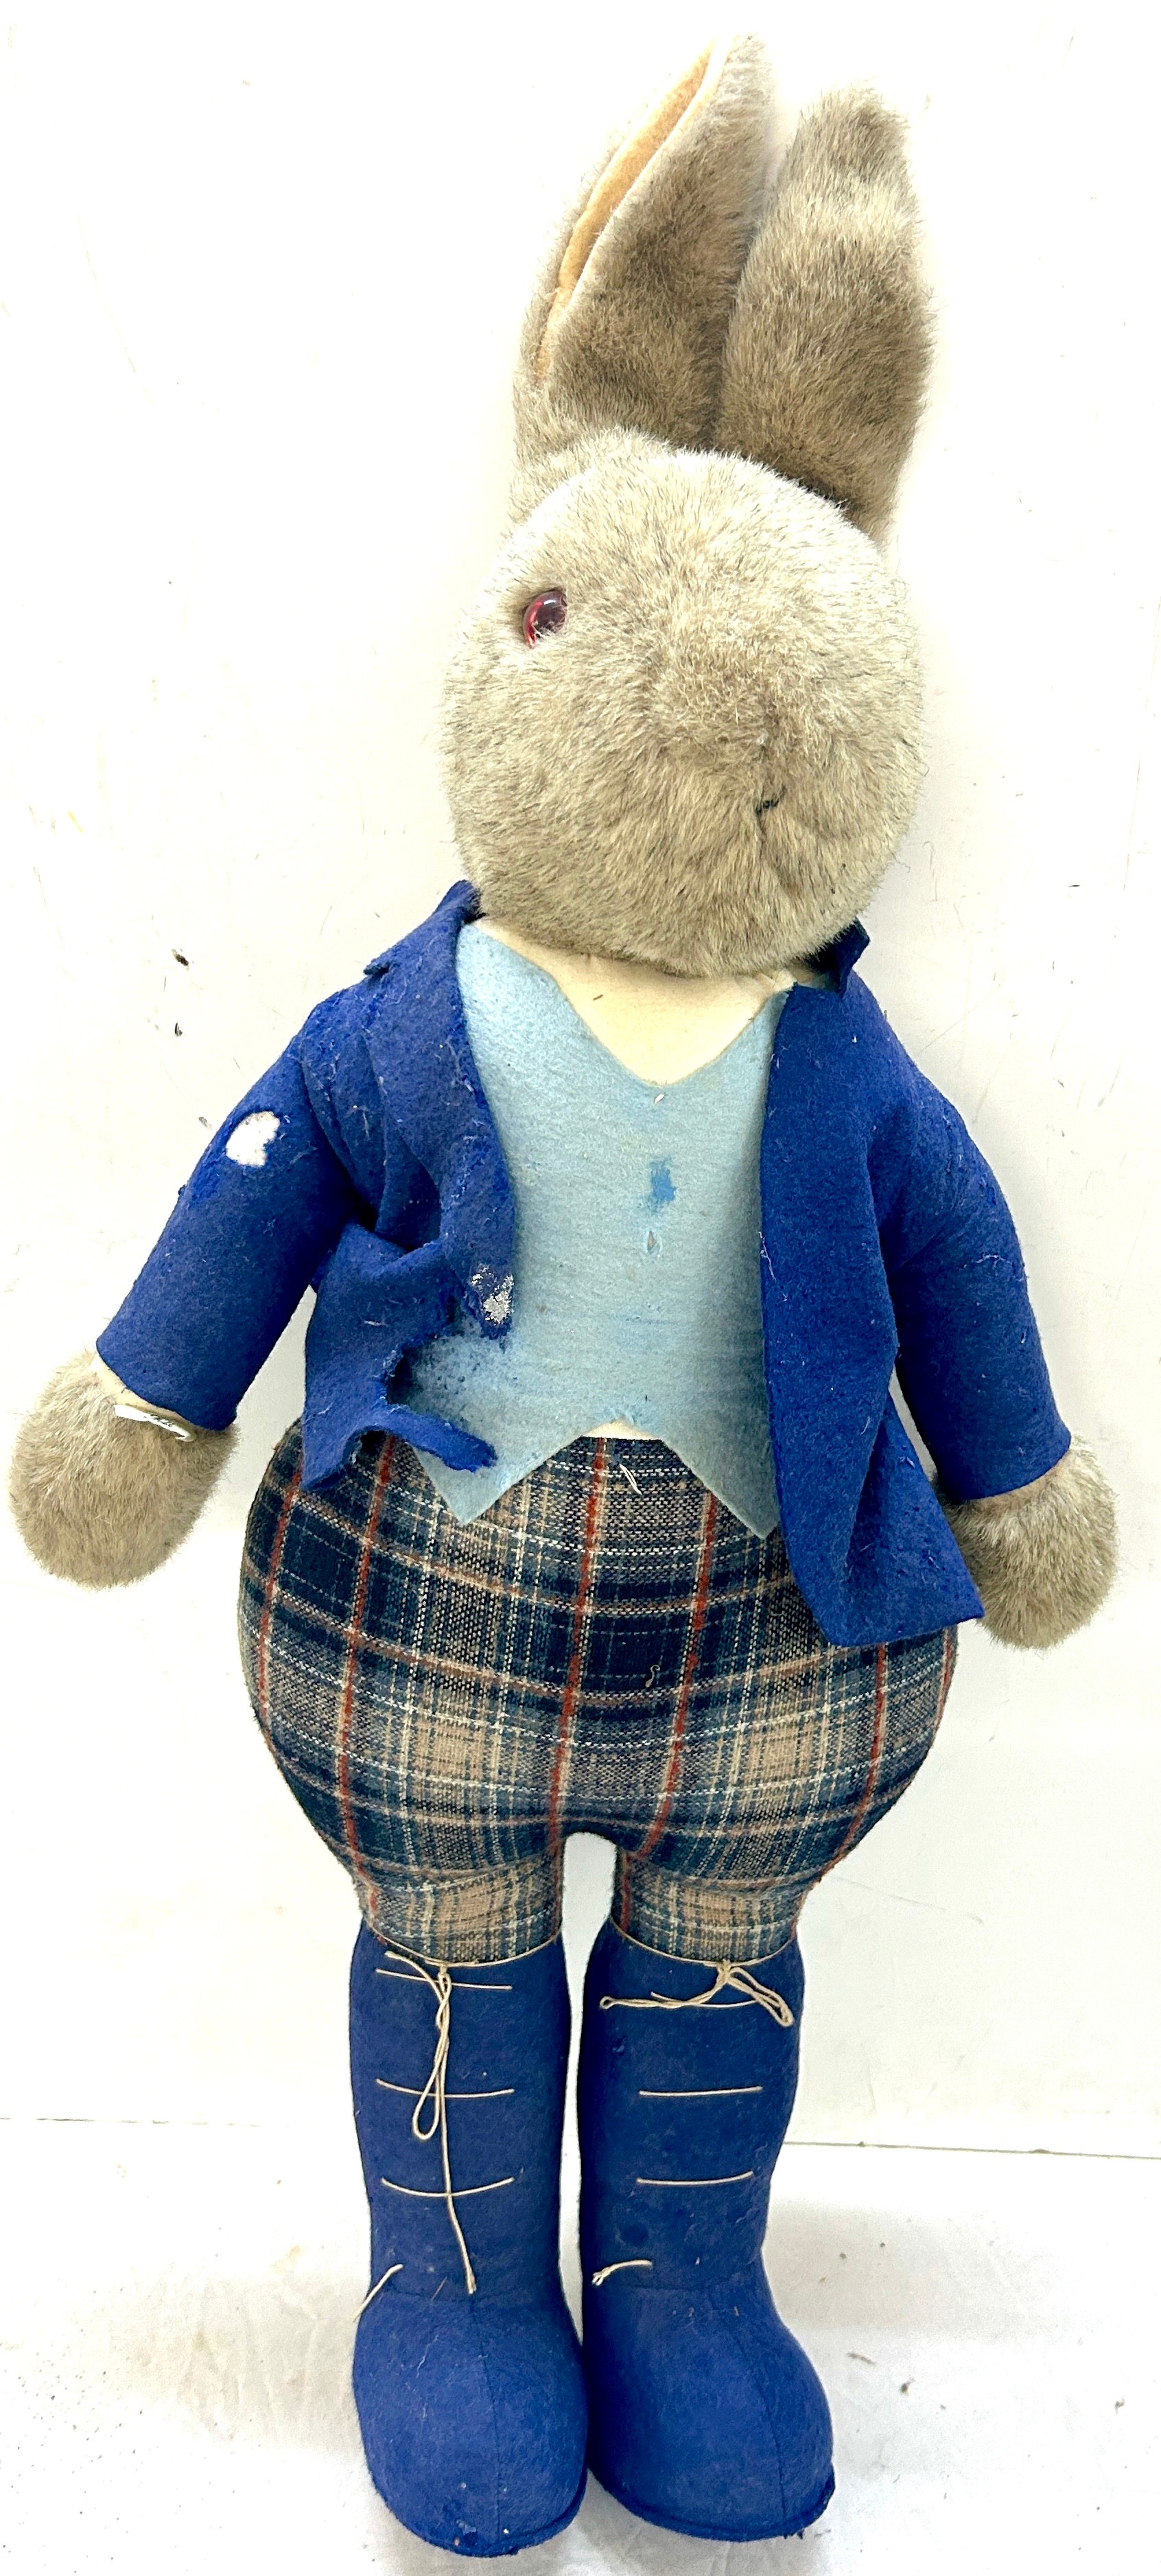 Vintage tall Little folk Peter Rabbit, jacket in need of repair, overall height 34 inches